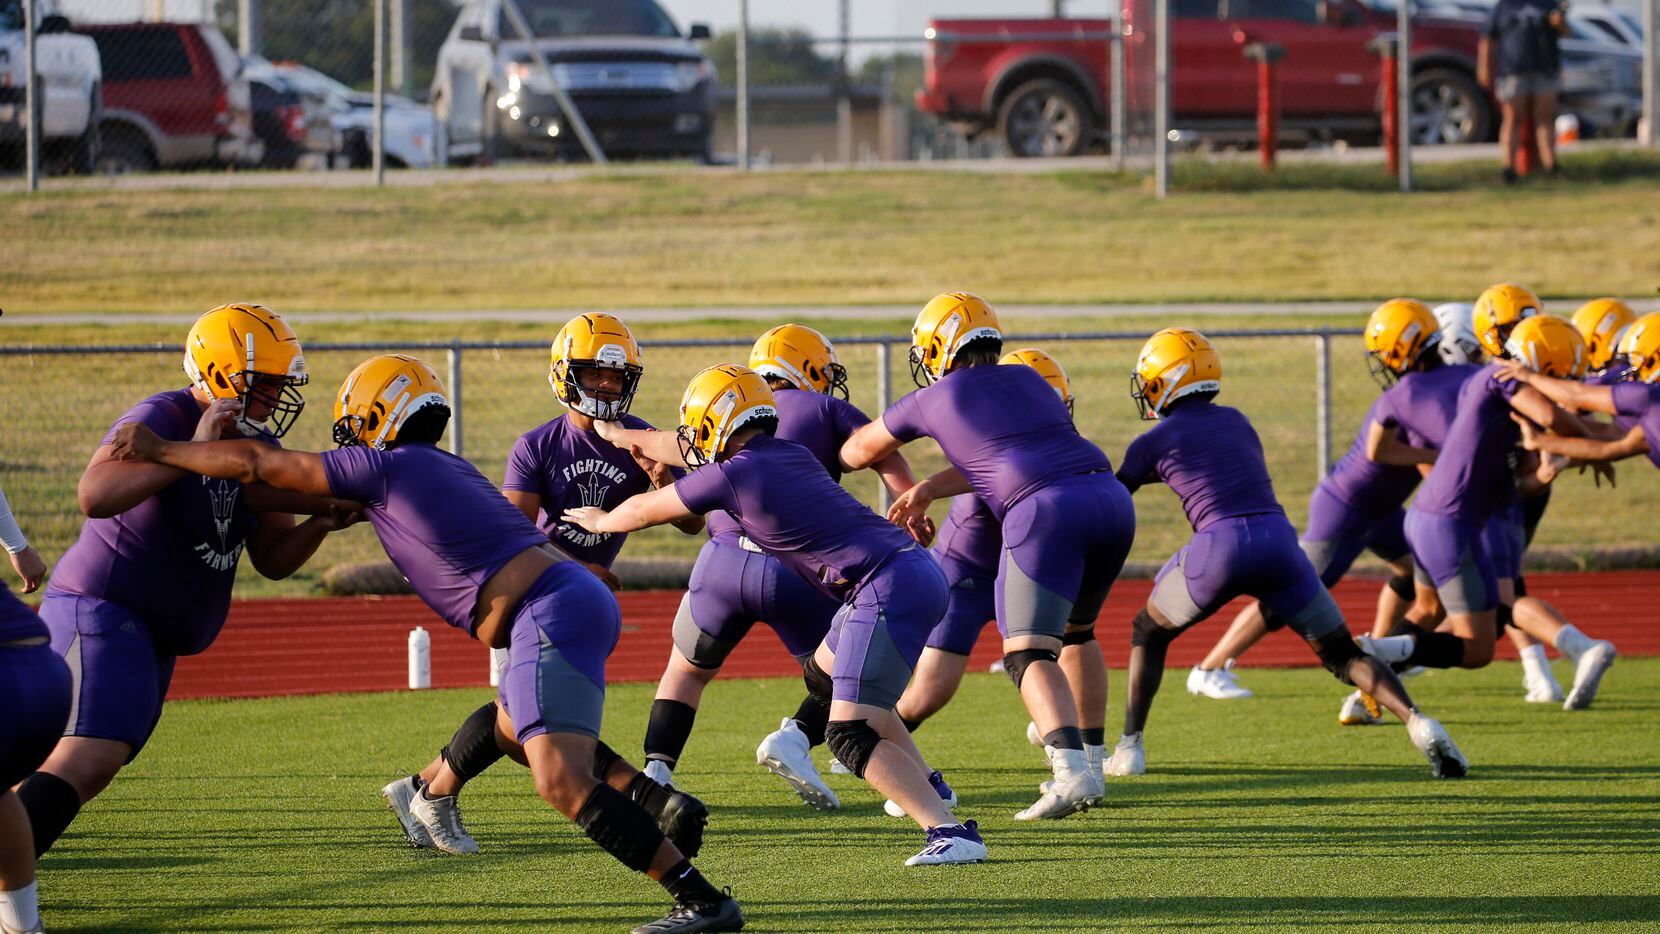 Linesmen run through a drill during the first day of high school football practice for 4A's Farmersville High School in Farmersville, Texas on Monday, August 3, 2020.